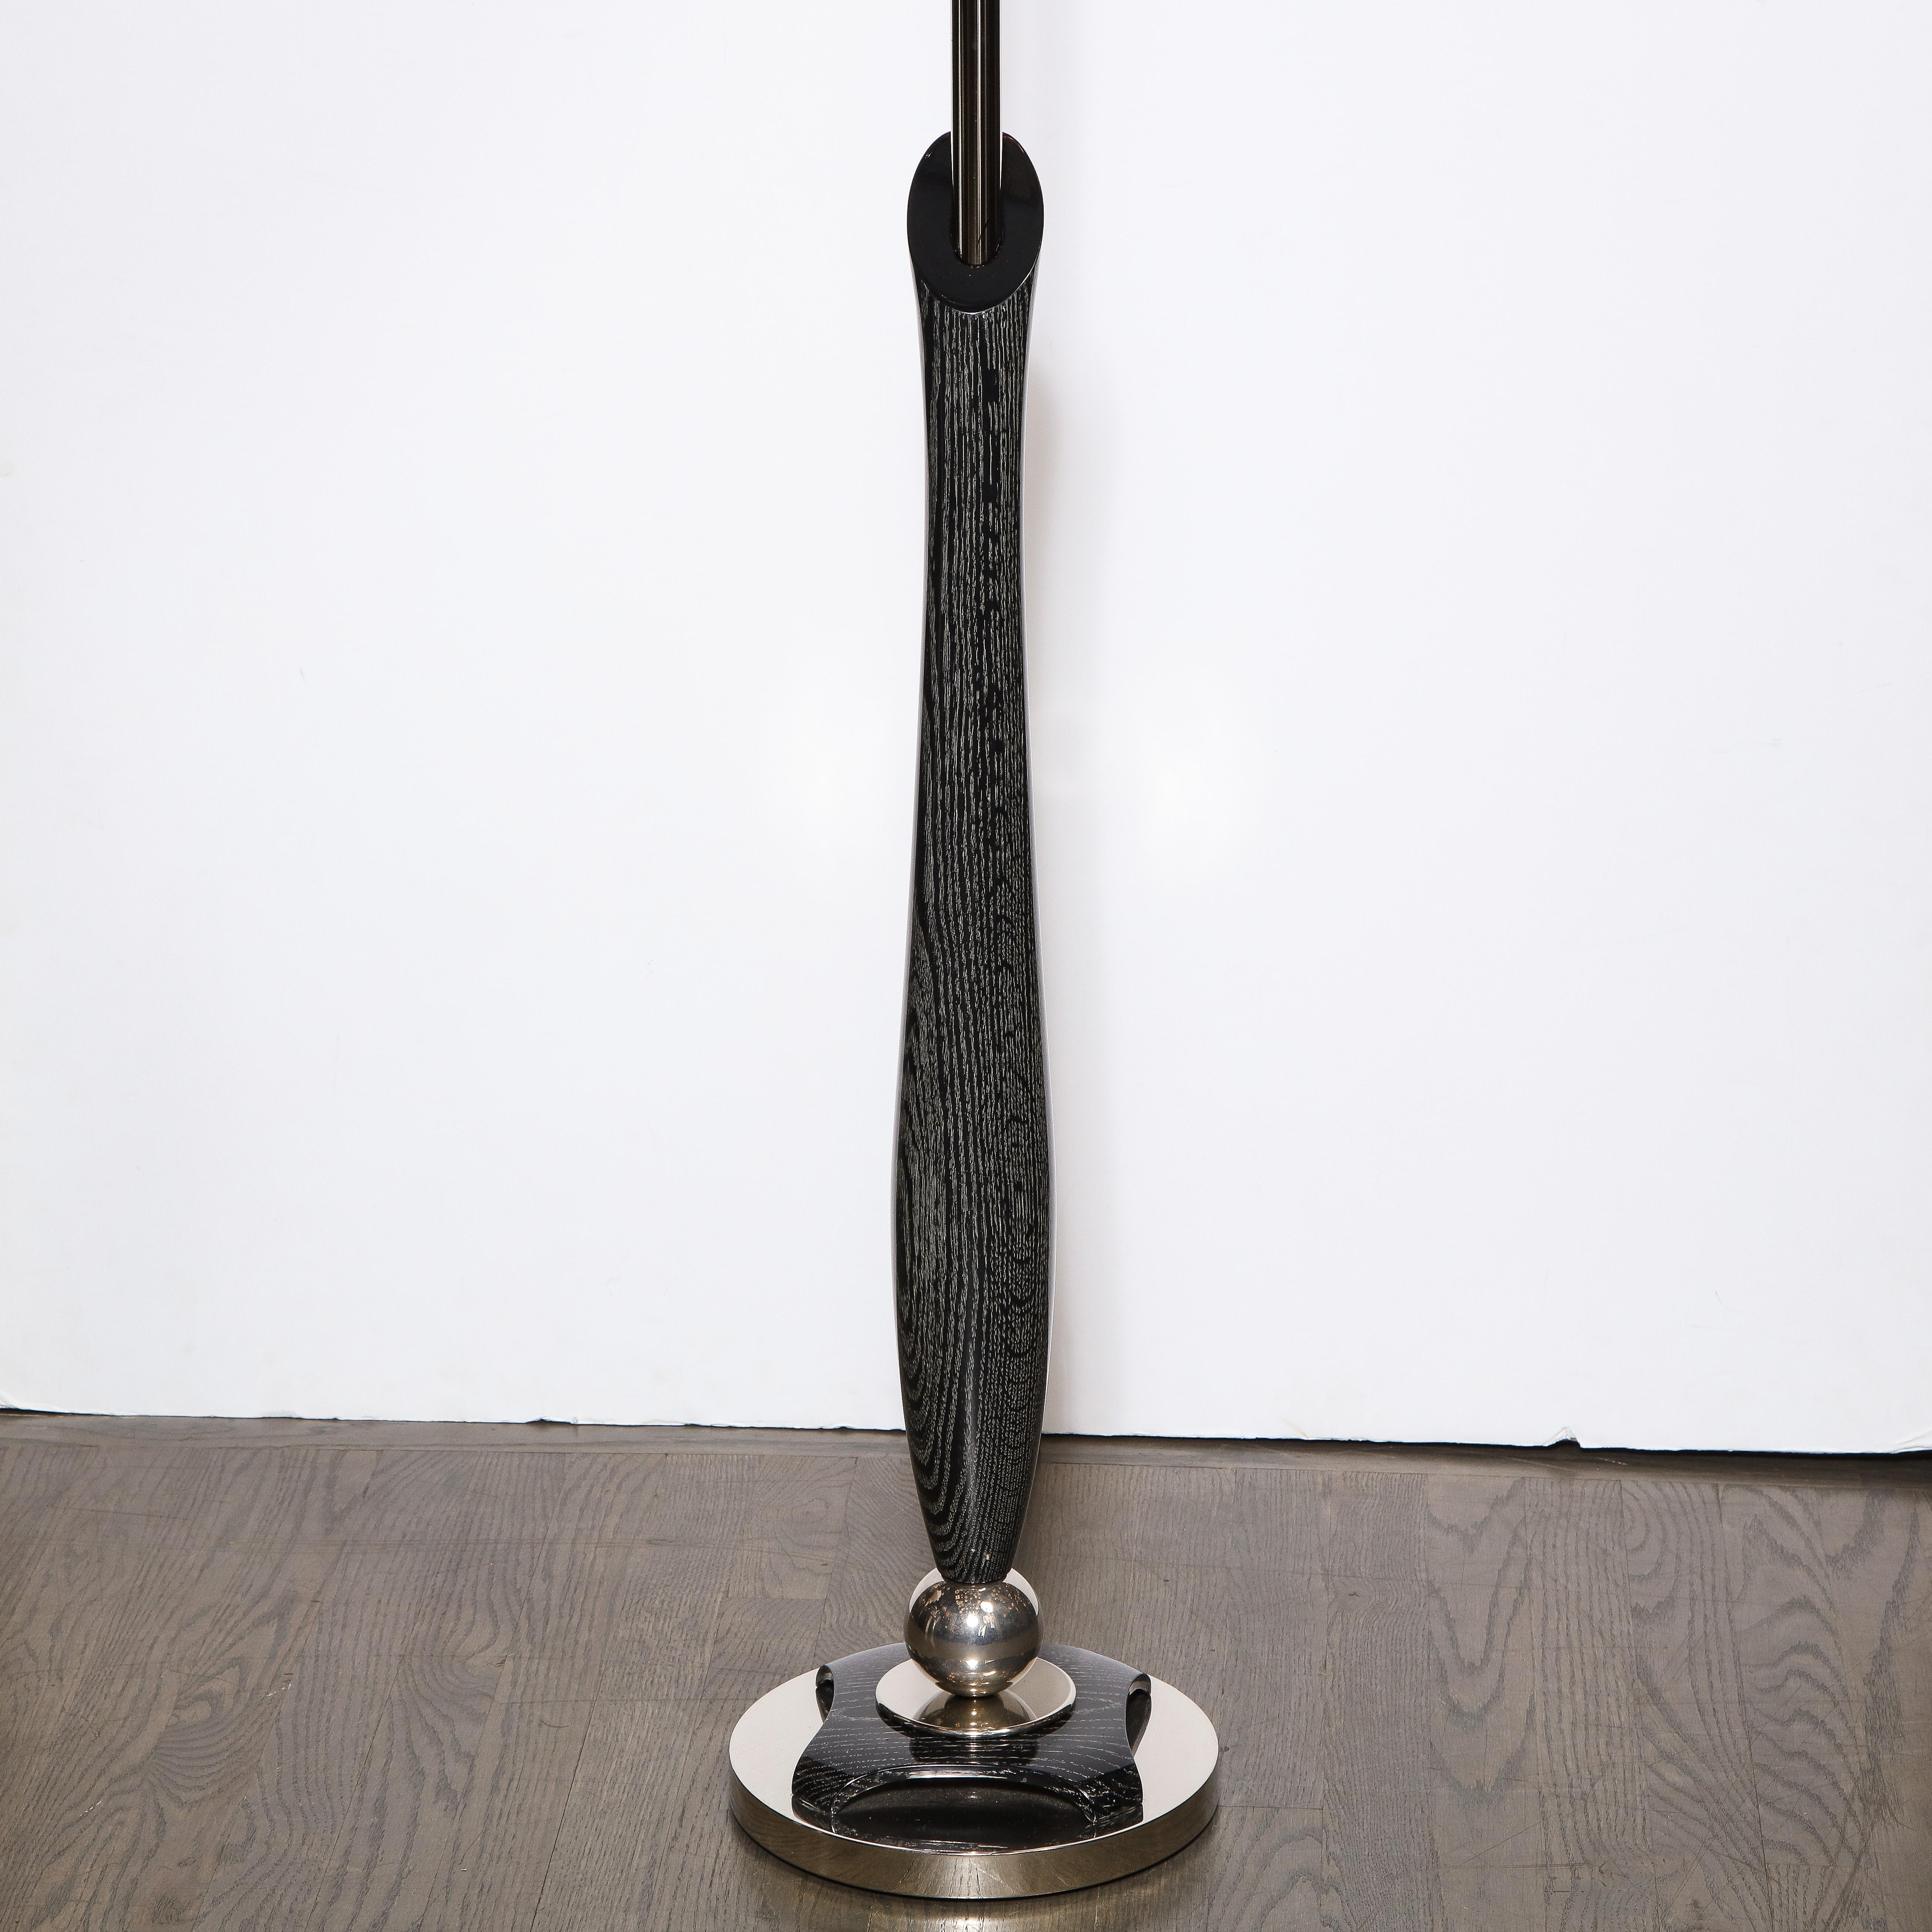 This striking Mid-Century Modern floor lamp was realized in the United States circa 1950. It features a inverse hourglass form silver cerused body that flares at its center with an angled (top cut on a bias) and brushed aluminum rod piercing the